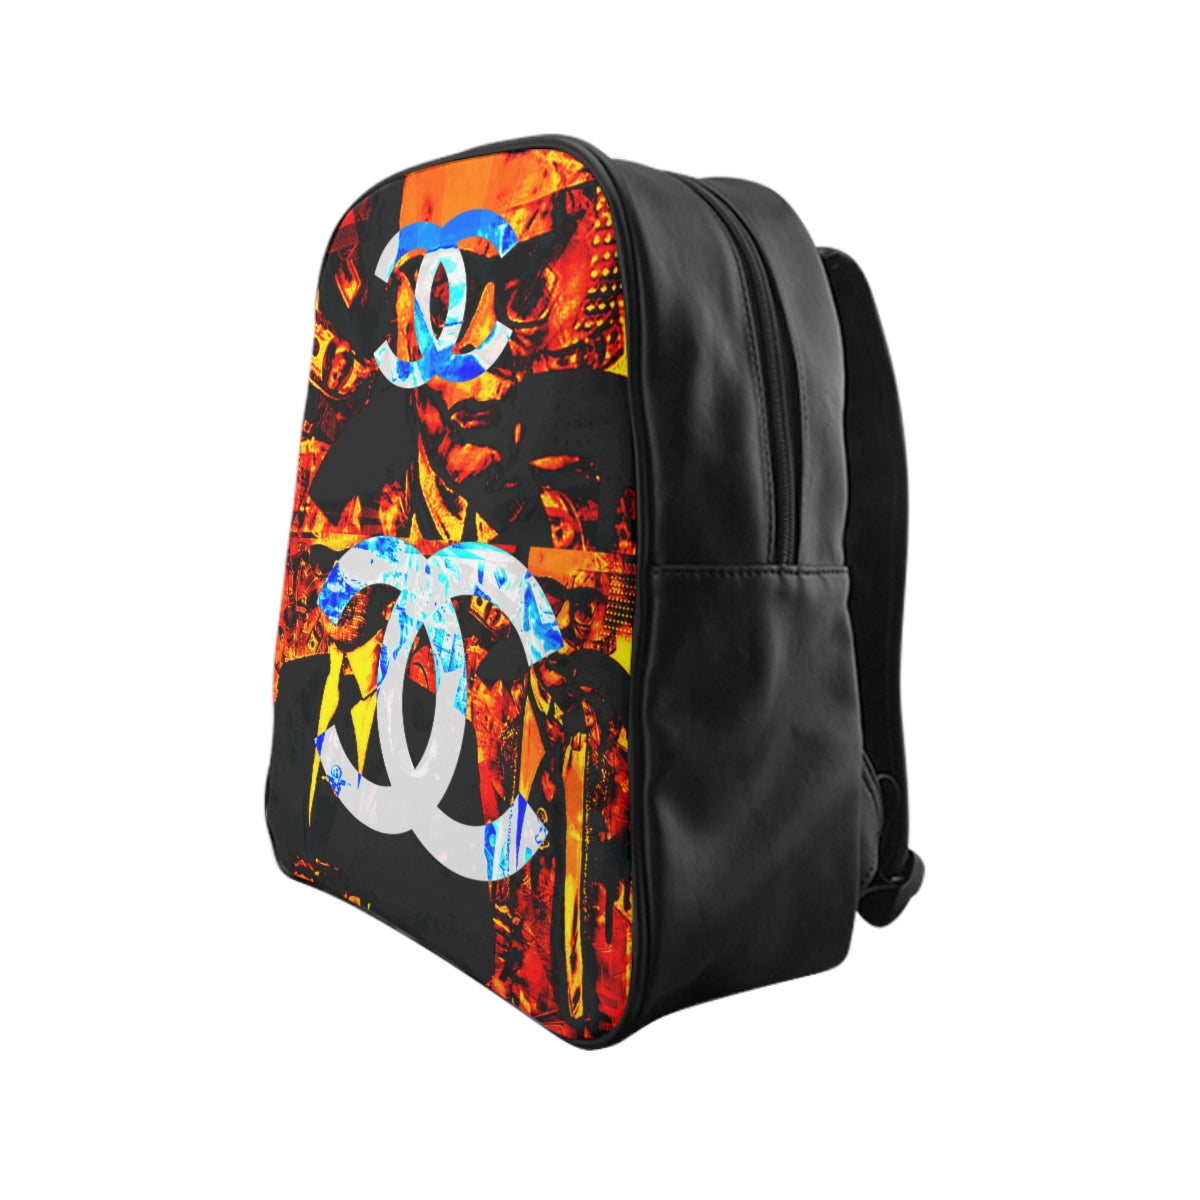 Getrott Inspired by C h a n e l Graffiti Red School Backpack Carry-On Travel Check Luggage 4-Wheel Spinner Suitcase Bag Multiple Colors and Sizes